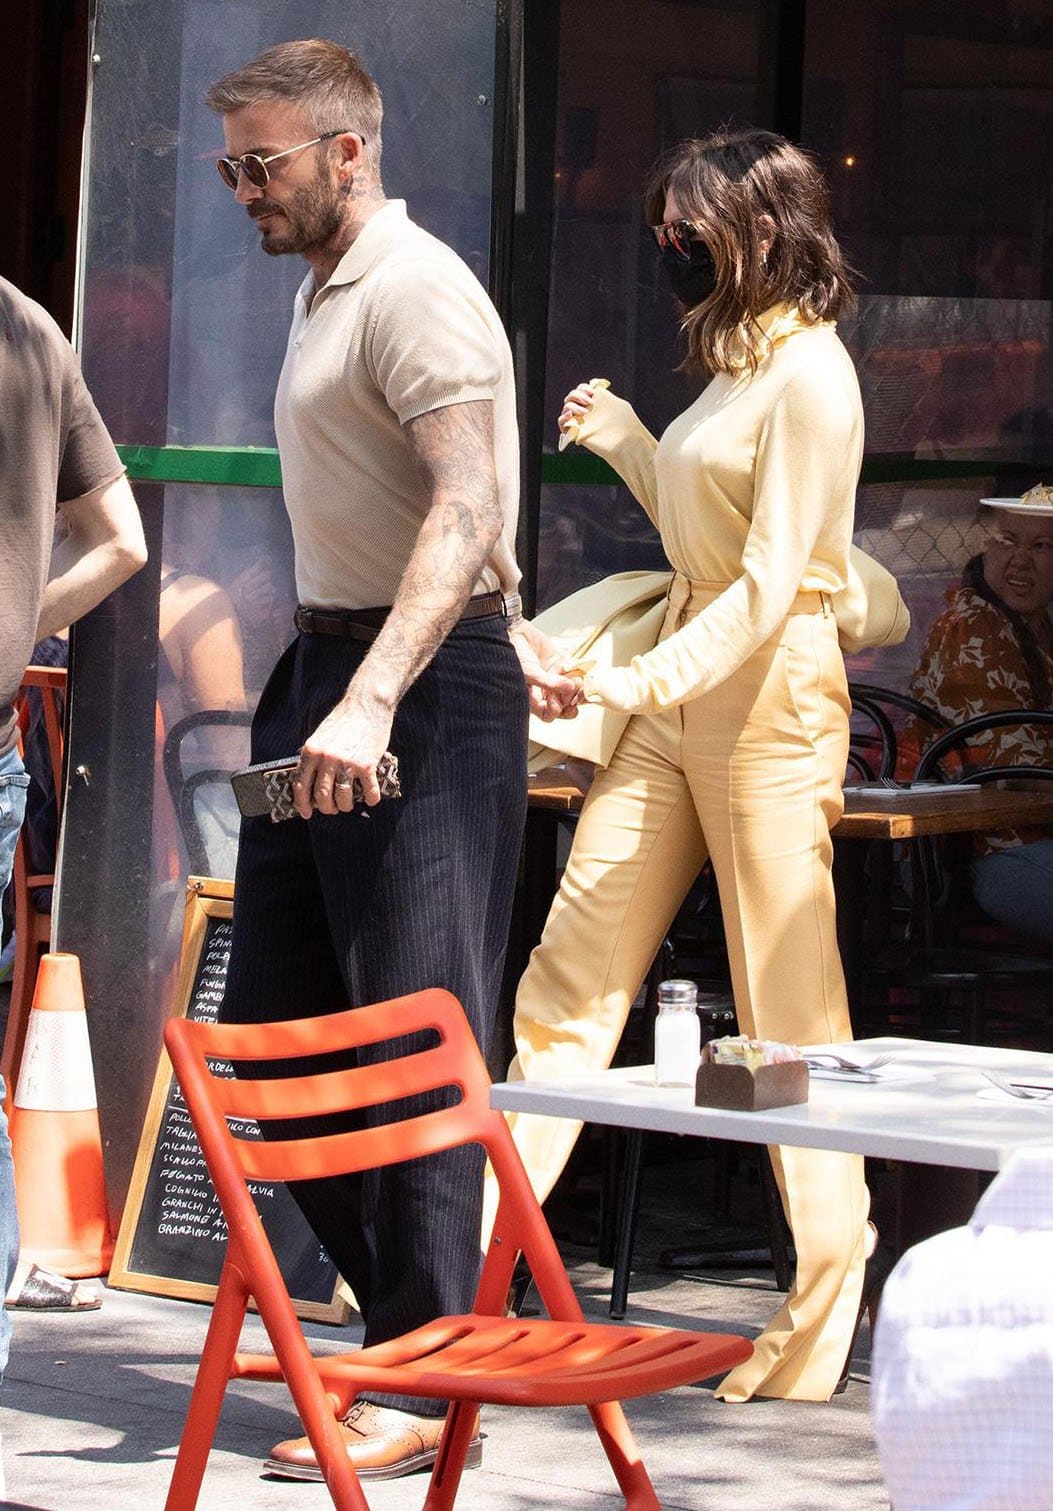 David Beckham and wife Victoria Beckham step out to have lunch at Bar Pitti in Greenwich Village on May 26, 2021